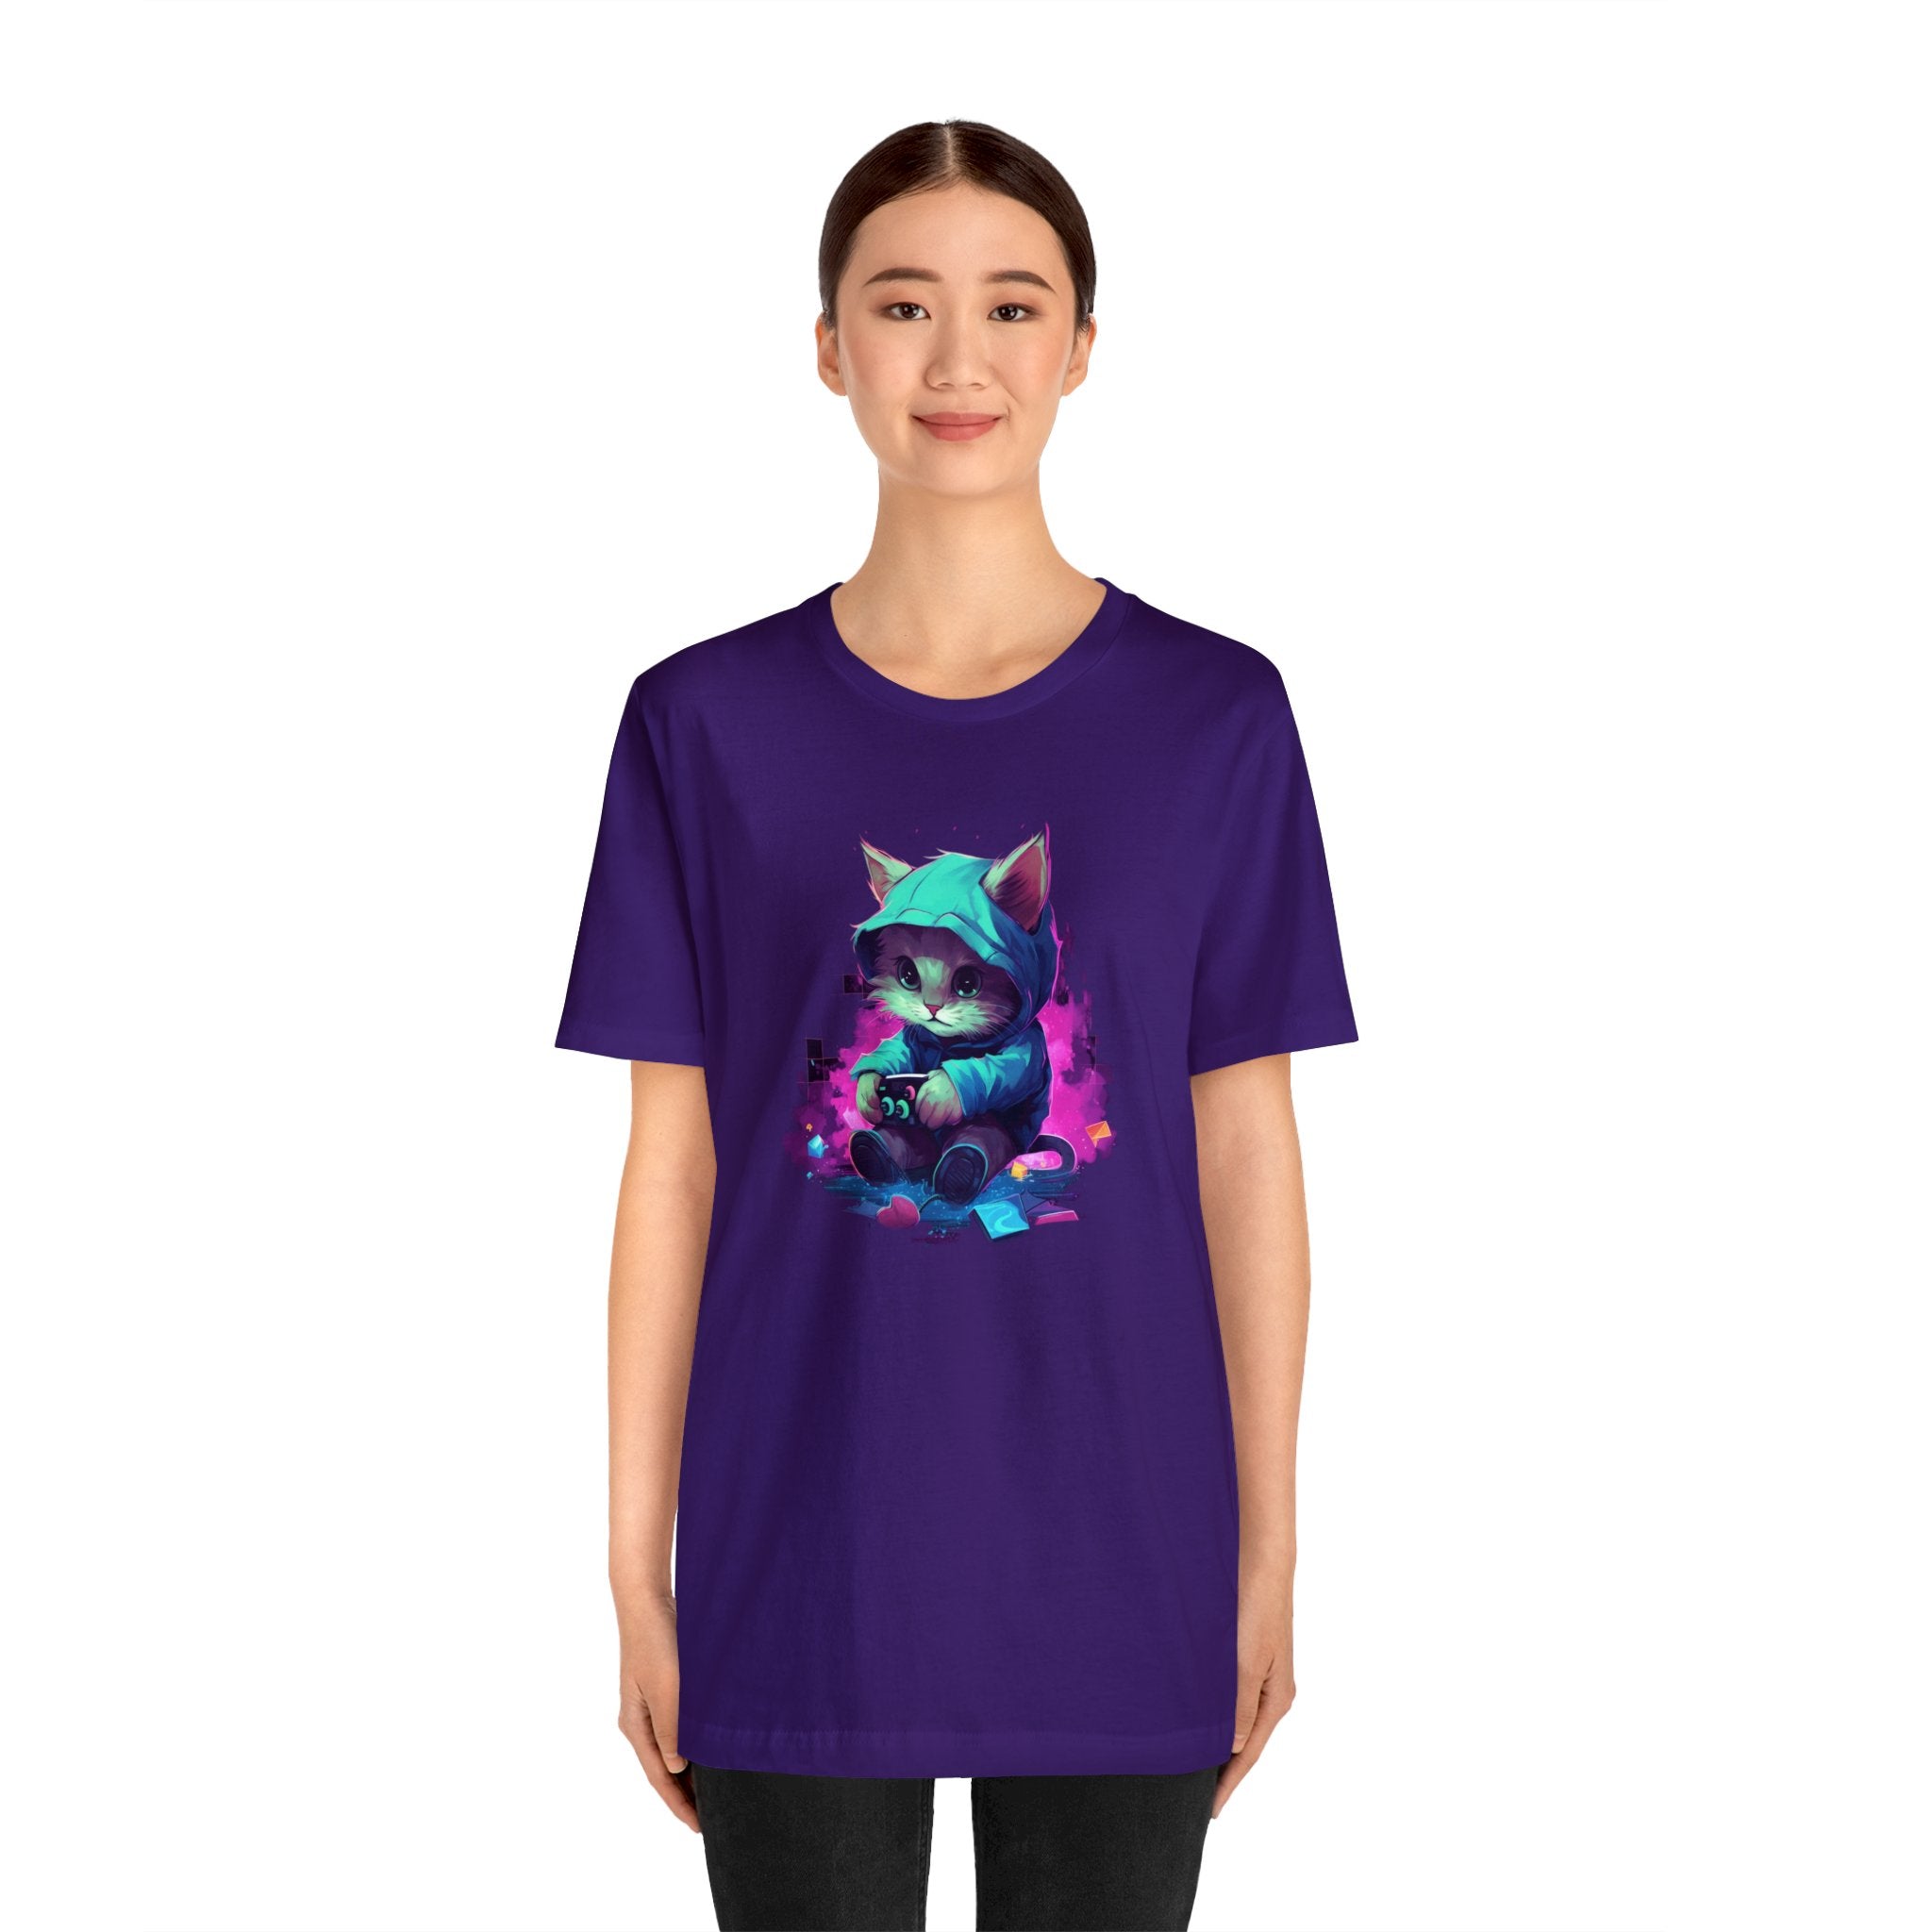 Gamer Kitty T-Shirt | Gift for Gamers, Gamer Shirt, Nerdy Gifts, Gift for Dad